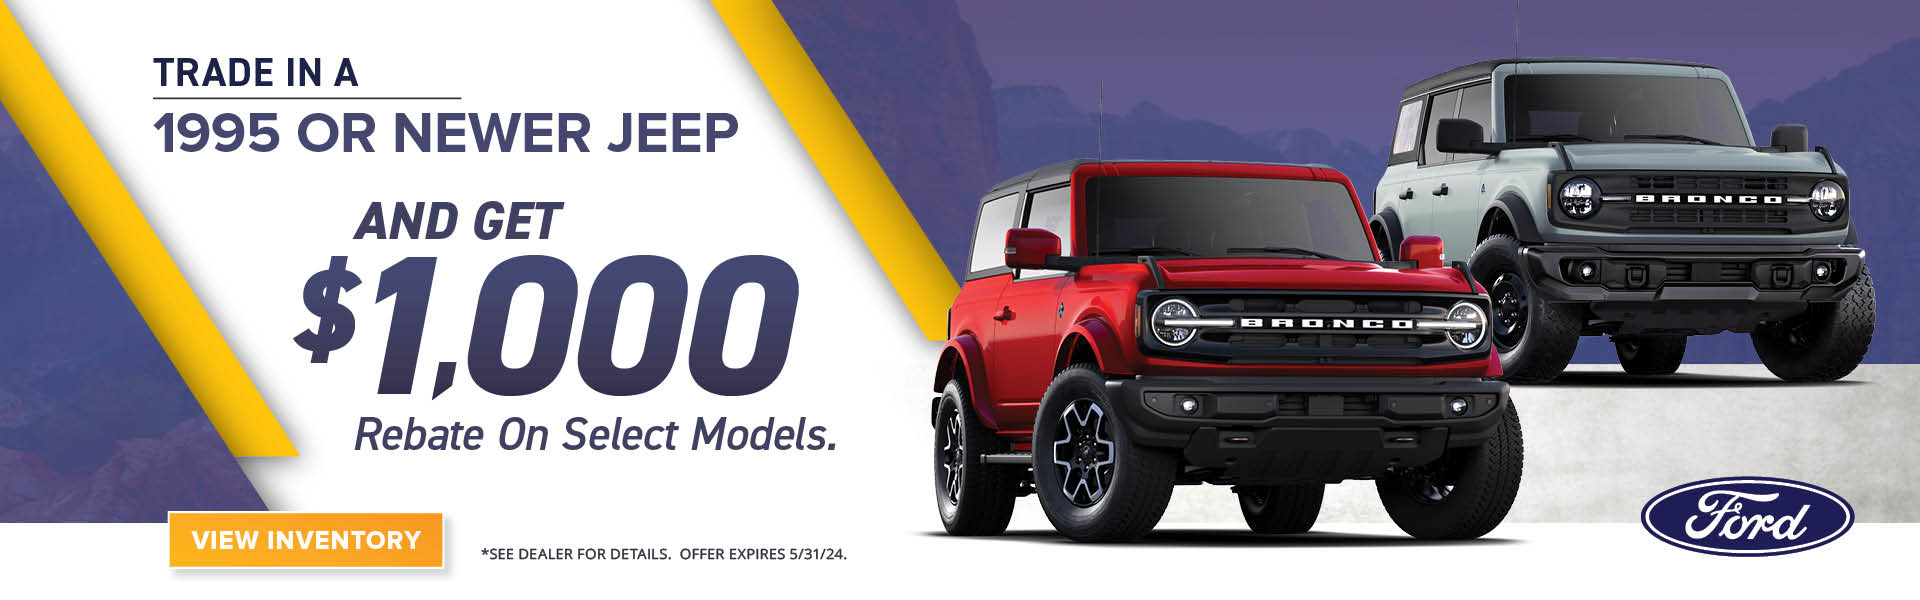 Trade In a 1995 or newer Jeep and get $1000 rebate on select